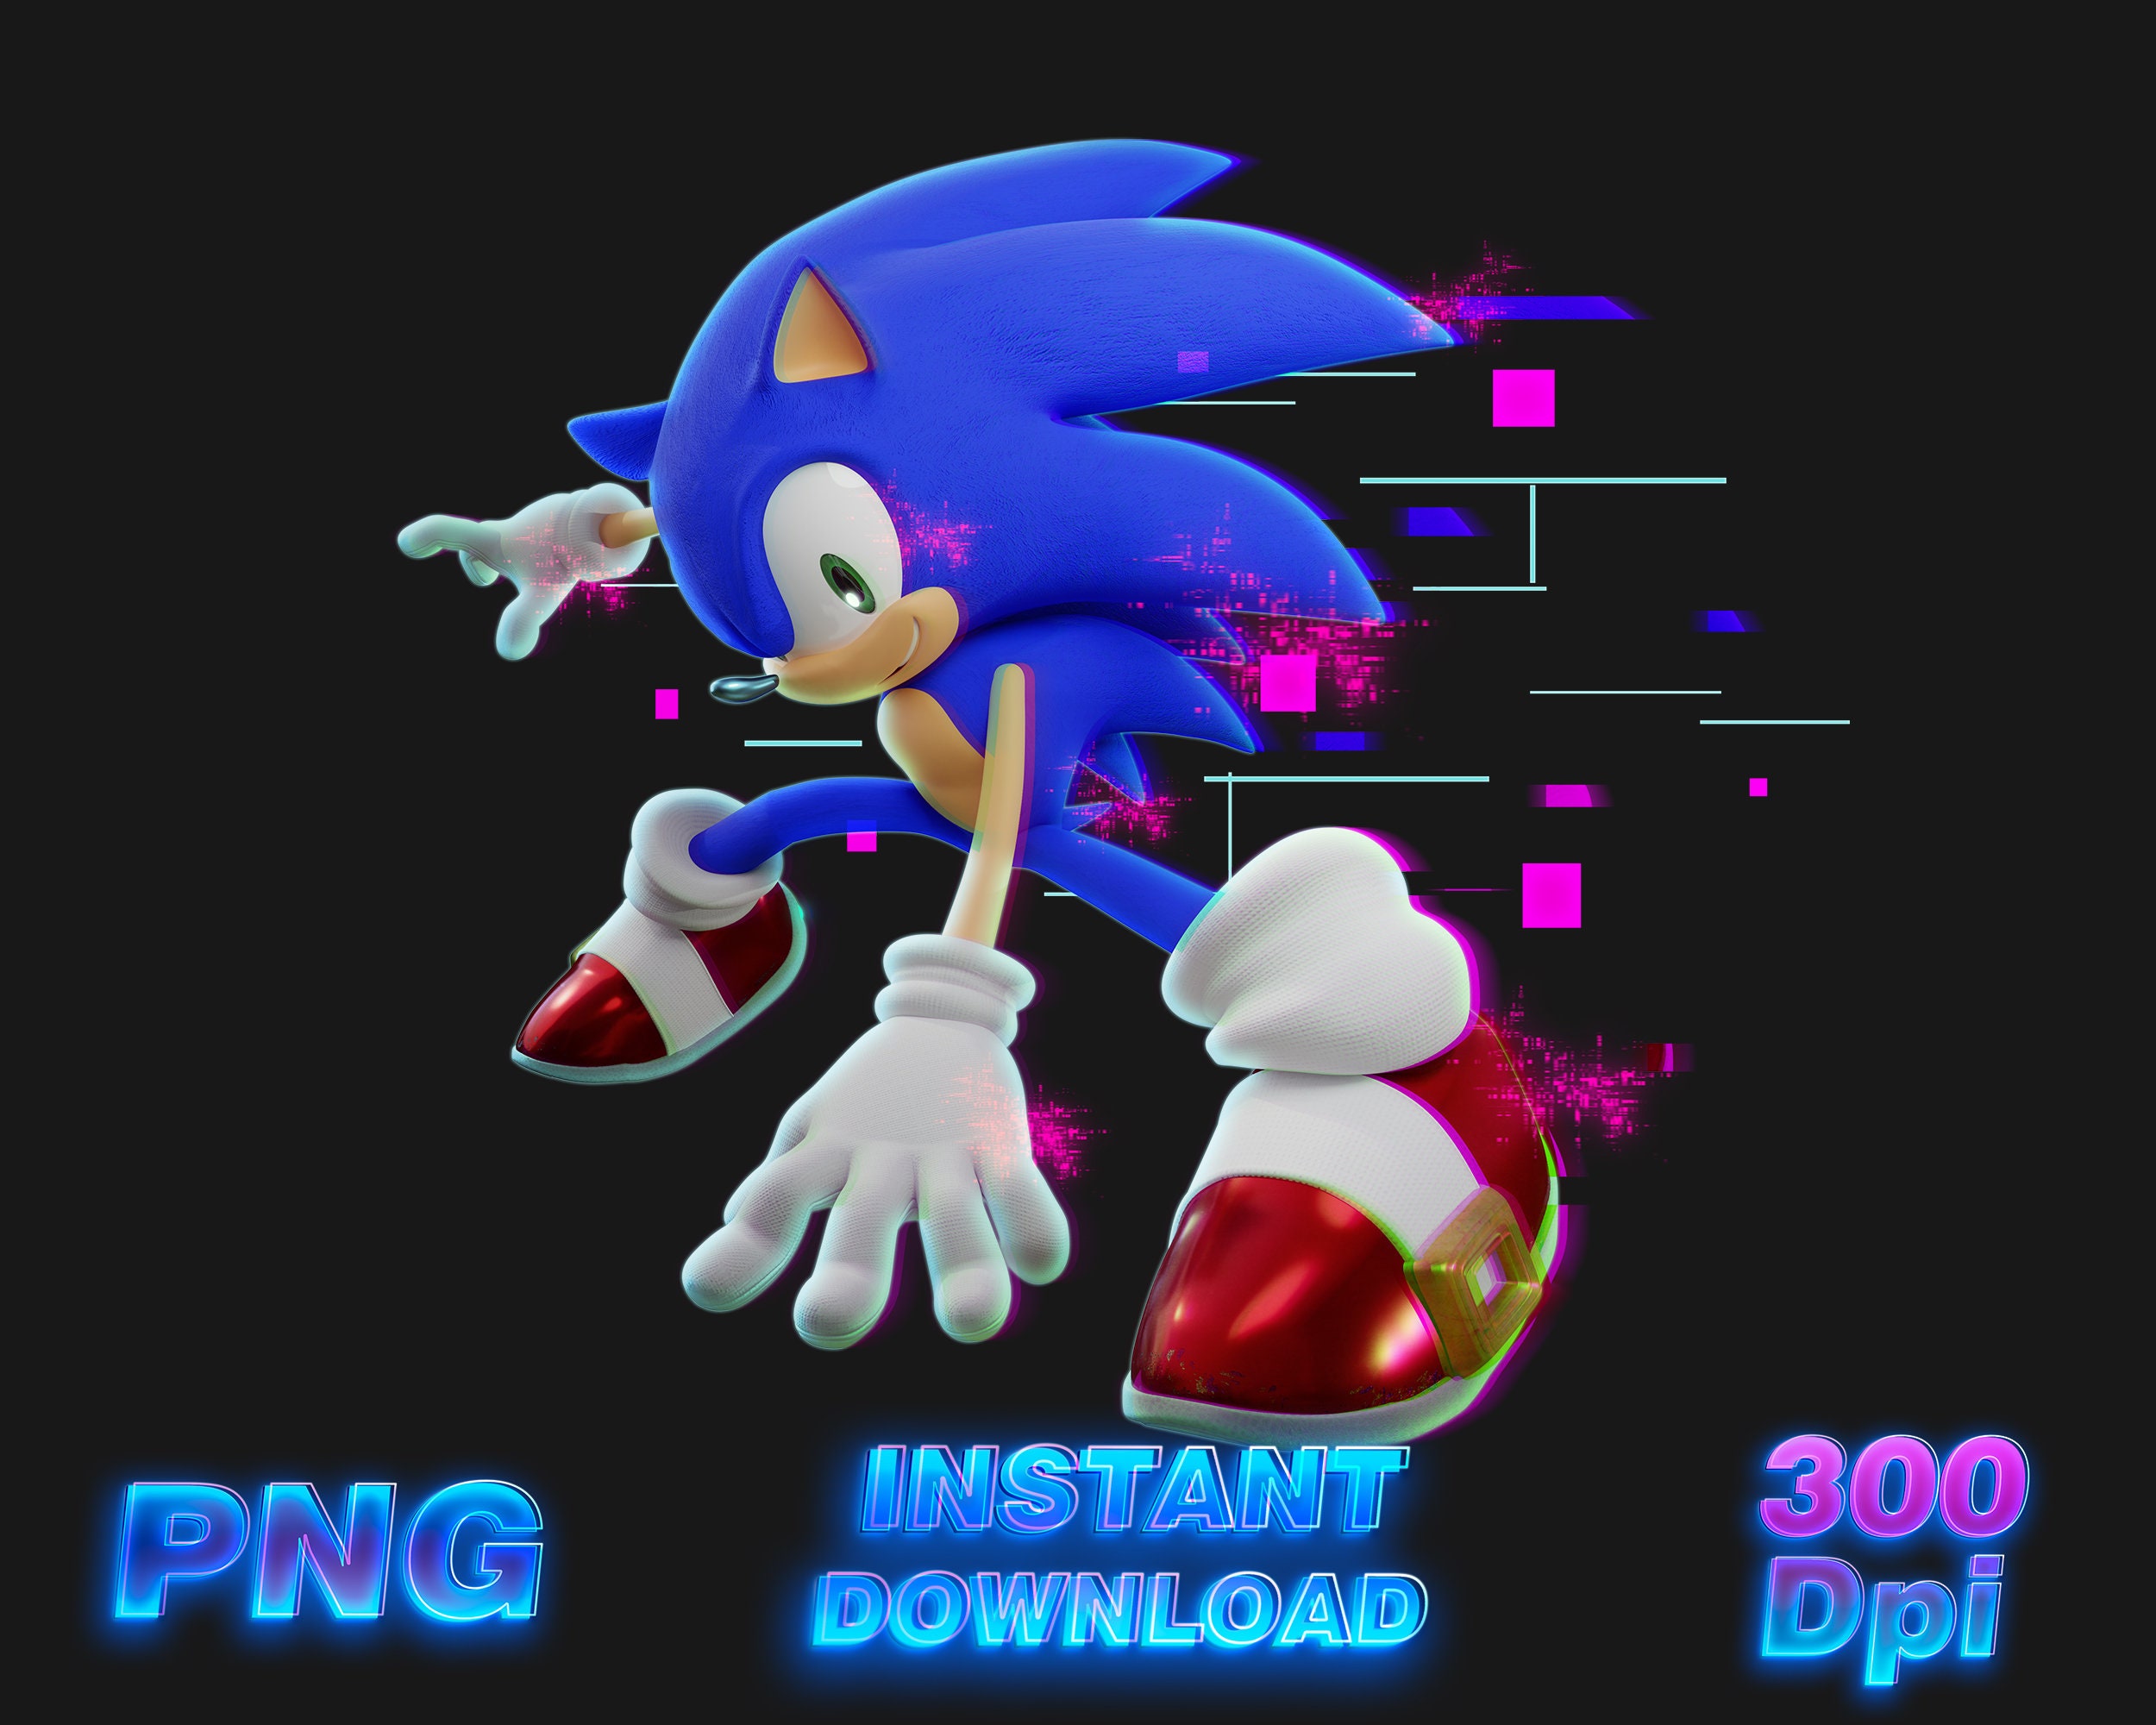 Sonic PNG Sonic The Hedgehog Png Transparent Image -  Portugal